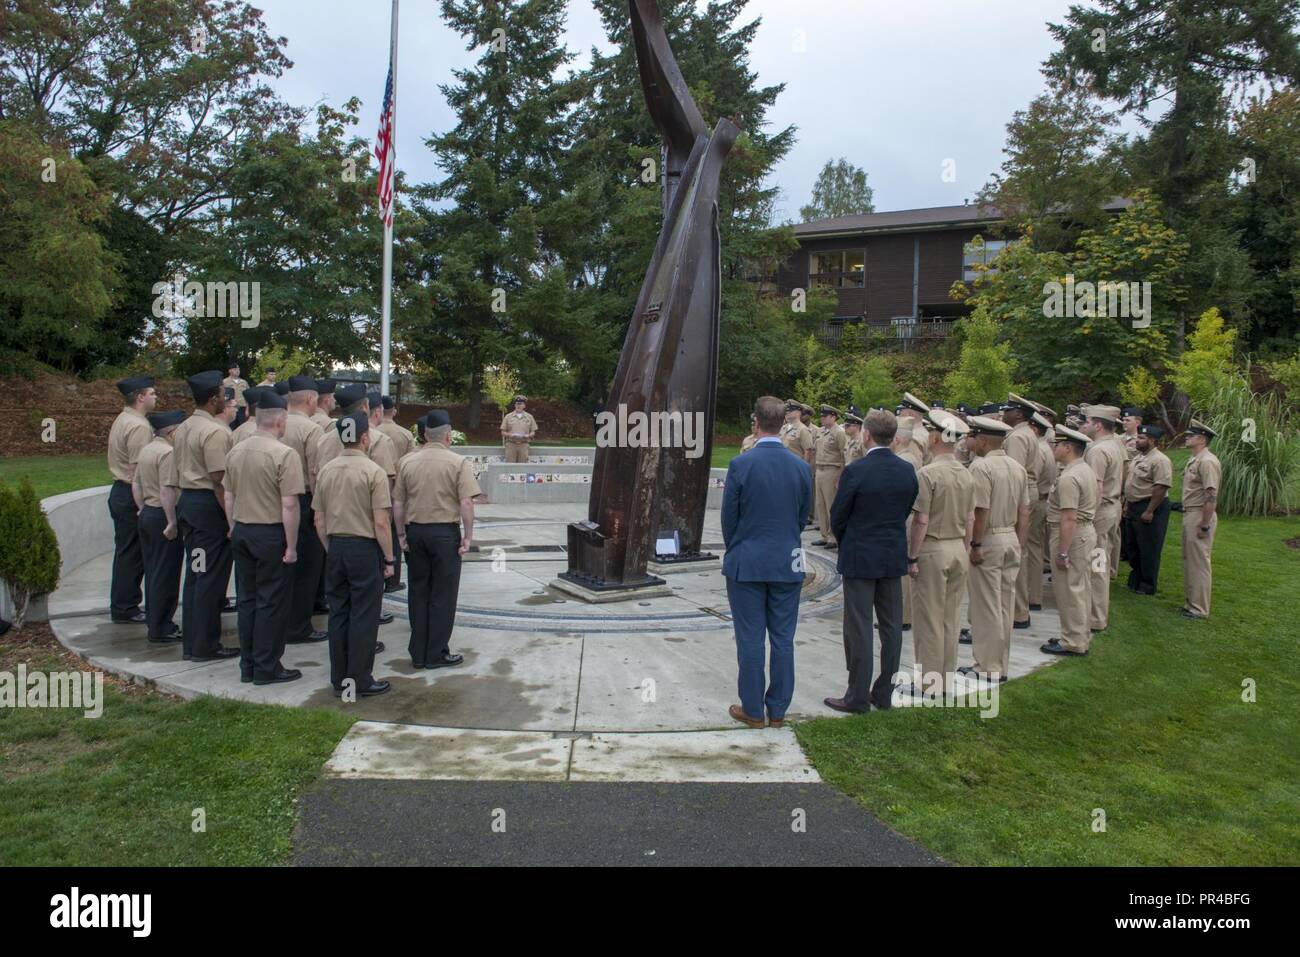 BREMERTON, Wash. (Sept. 11, 2018) Chief Electrician's Mate Anthony Vezina, assigned to Submarine Development Squadron (DEVRON) 5, delivers remarks during a 9/11 Remembrance Ceremony held at the Kitsap 9/11 Memorial. The ceremony, held by the 2019 DEVRON 5 Chief Petty Officer Selects, marks the 17th anniversary of the 9/11 attacks and honors those who lost their lives that day. Stock Photo